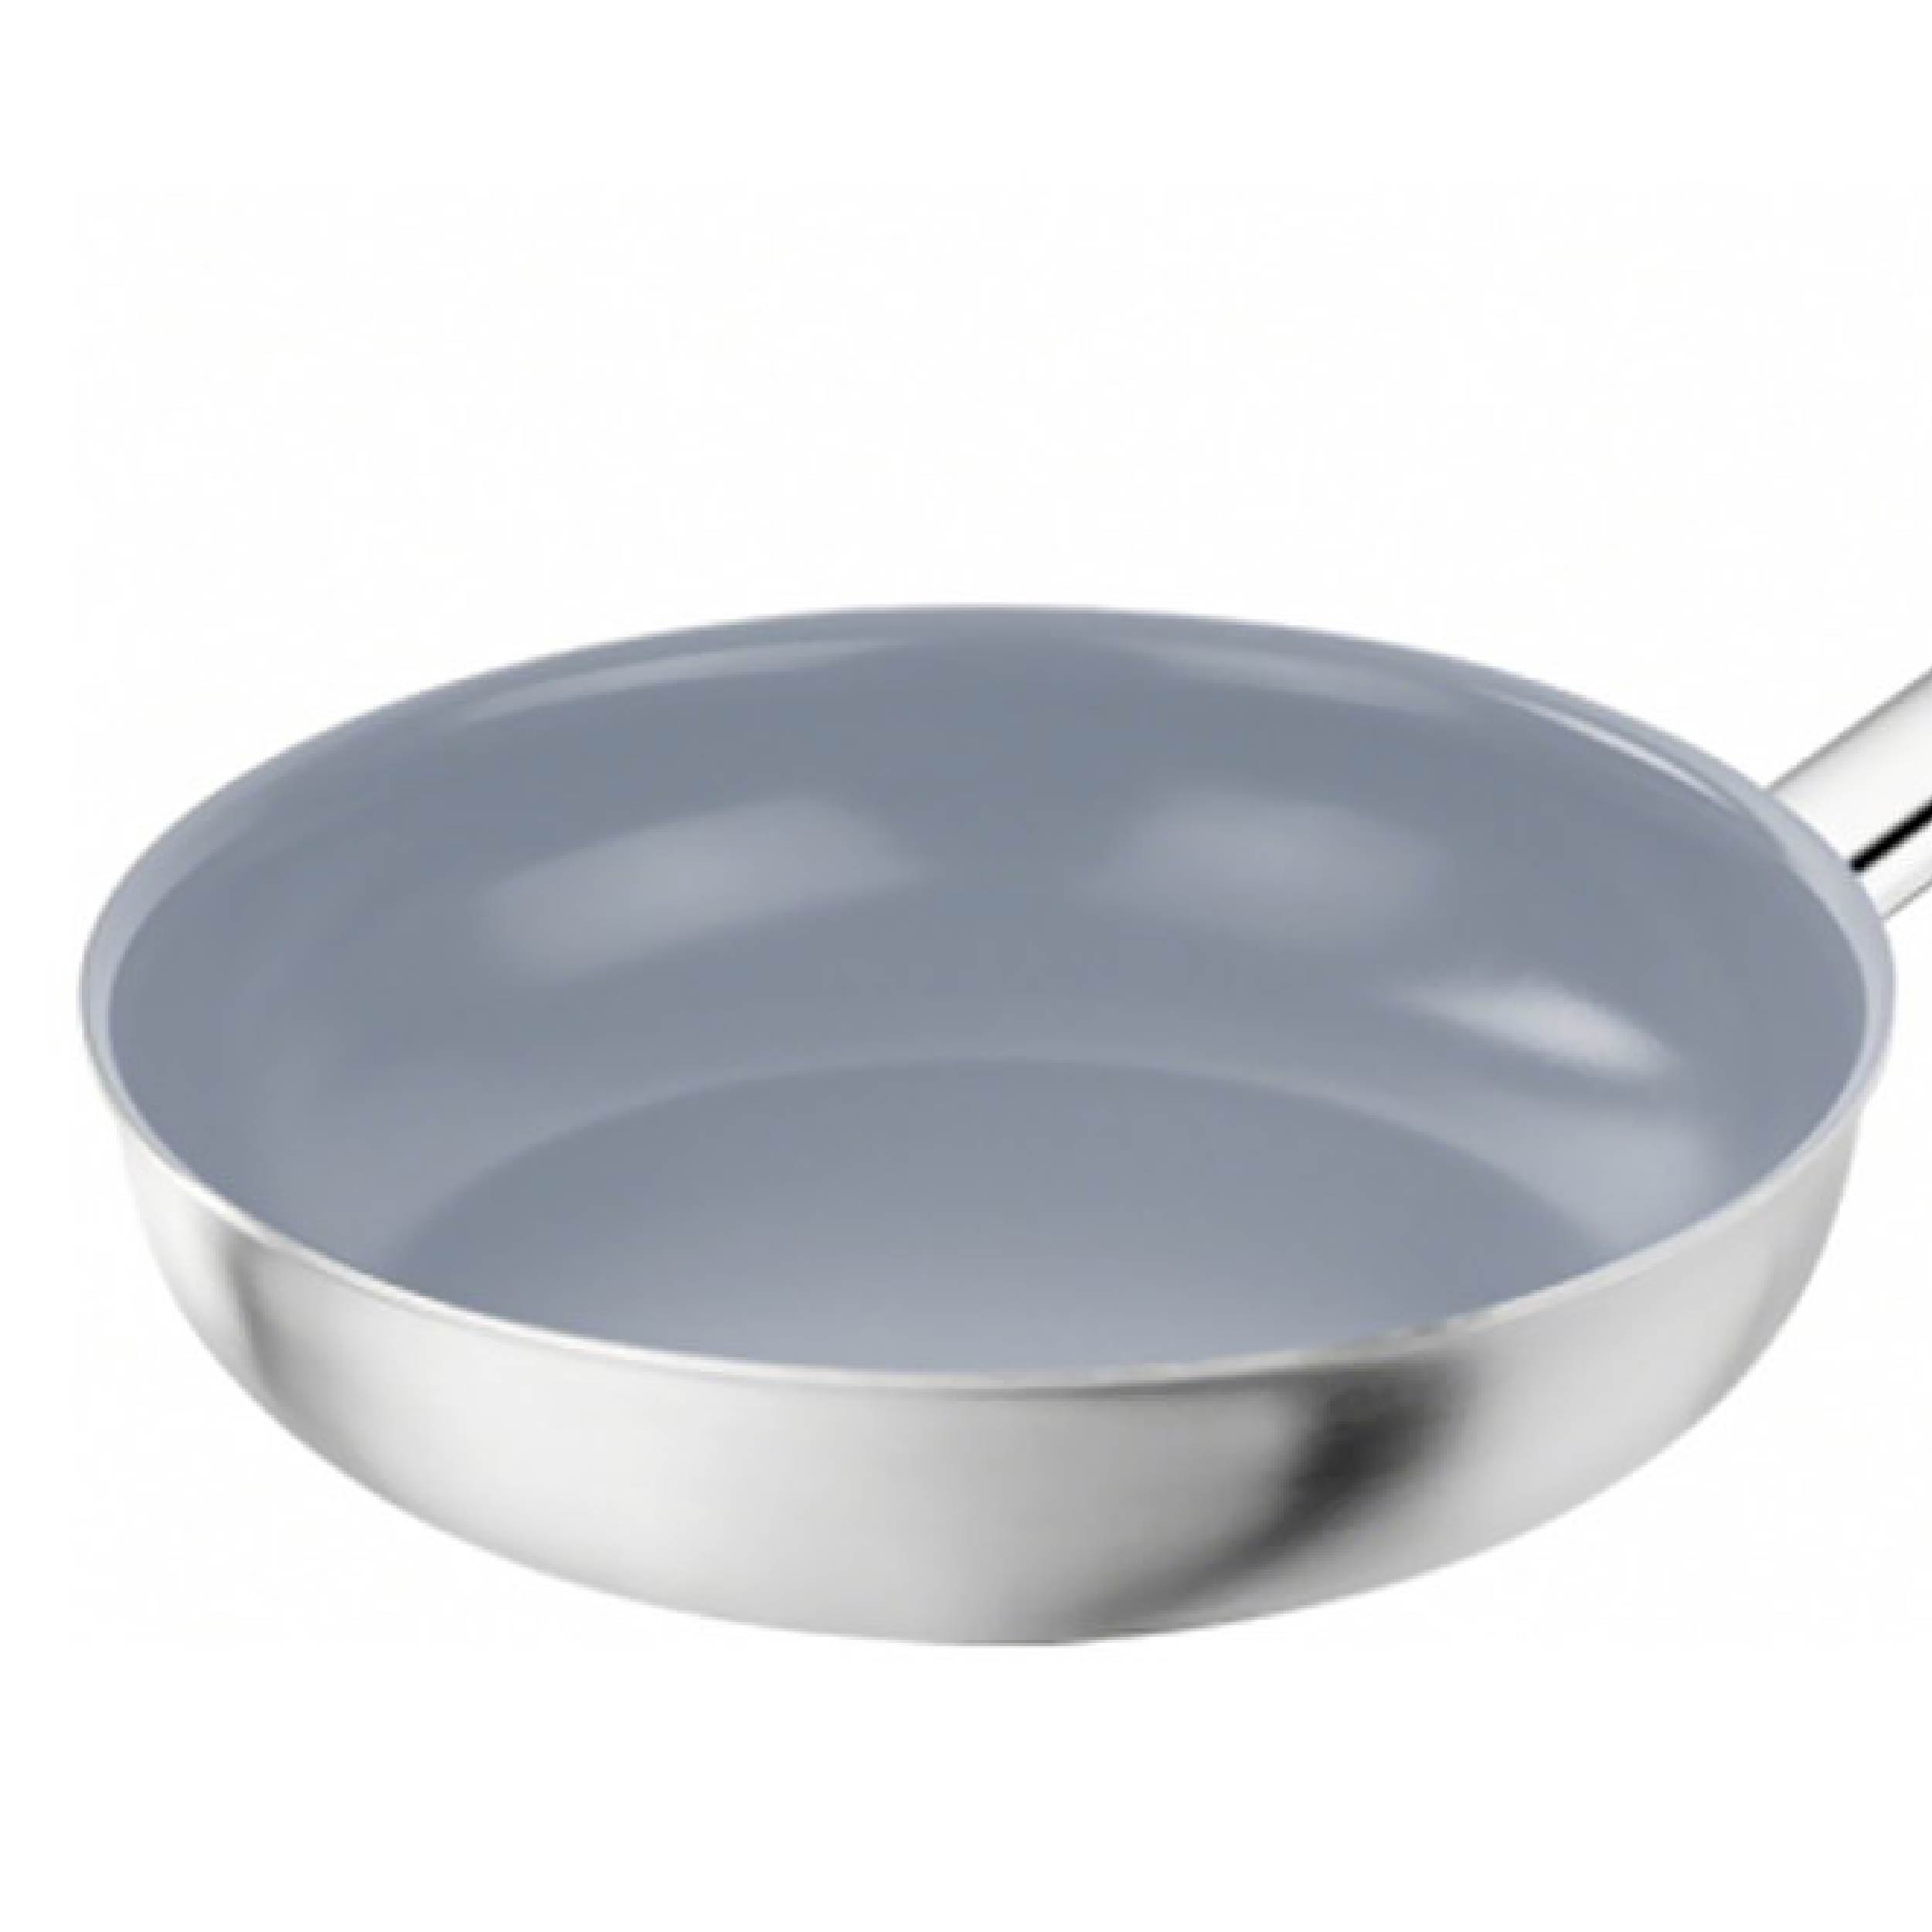 ZWILLING - Chảo inox chống dính ZWILLING Prime